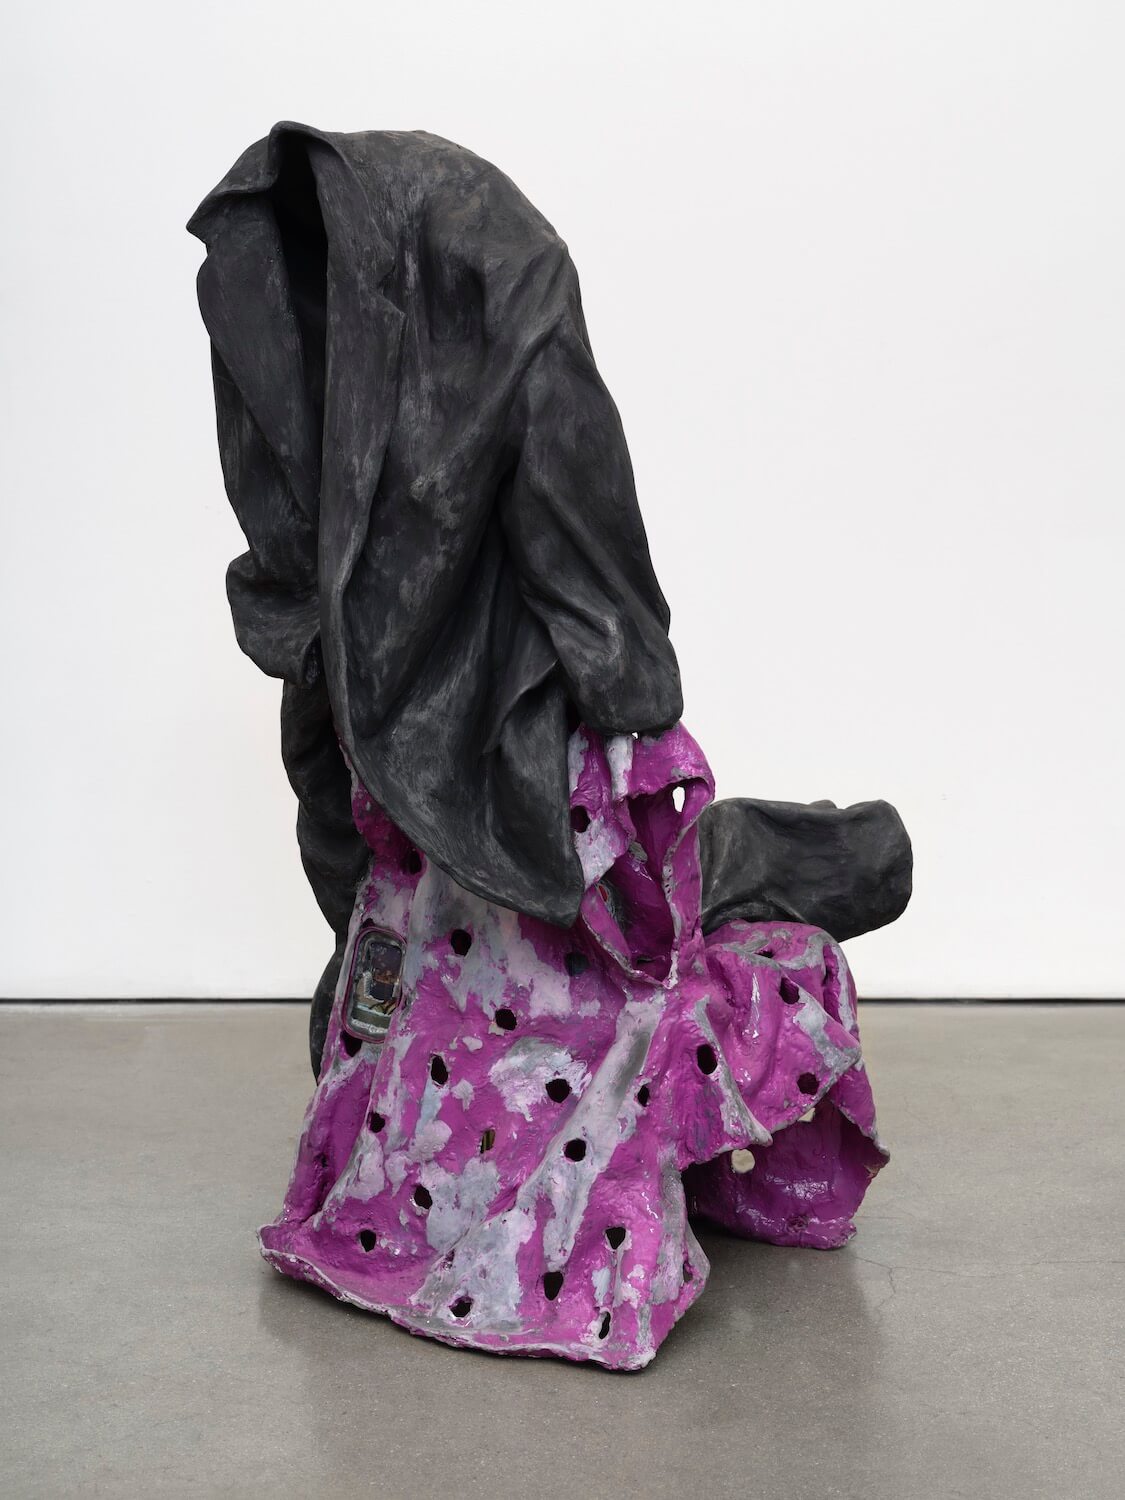 Kelly, Untitled (Suit), 2022 (AGK 22.001)5